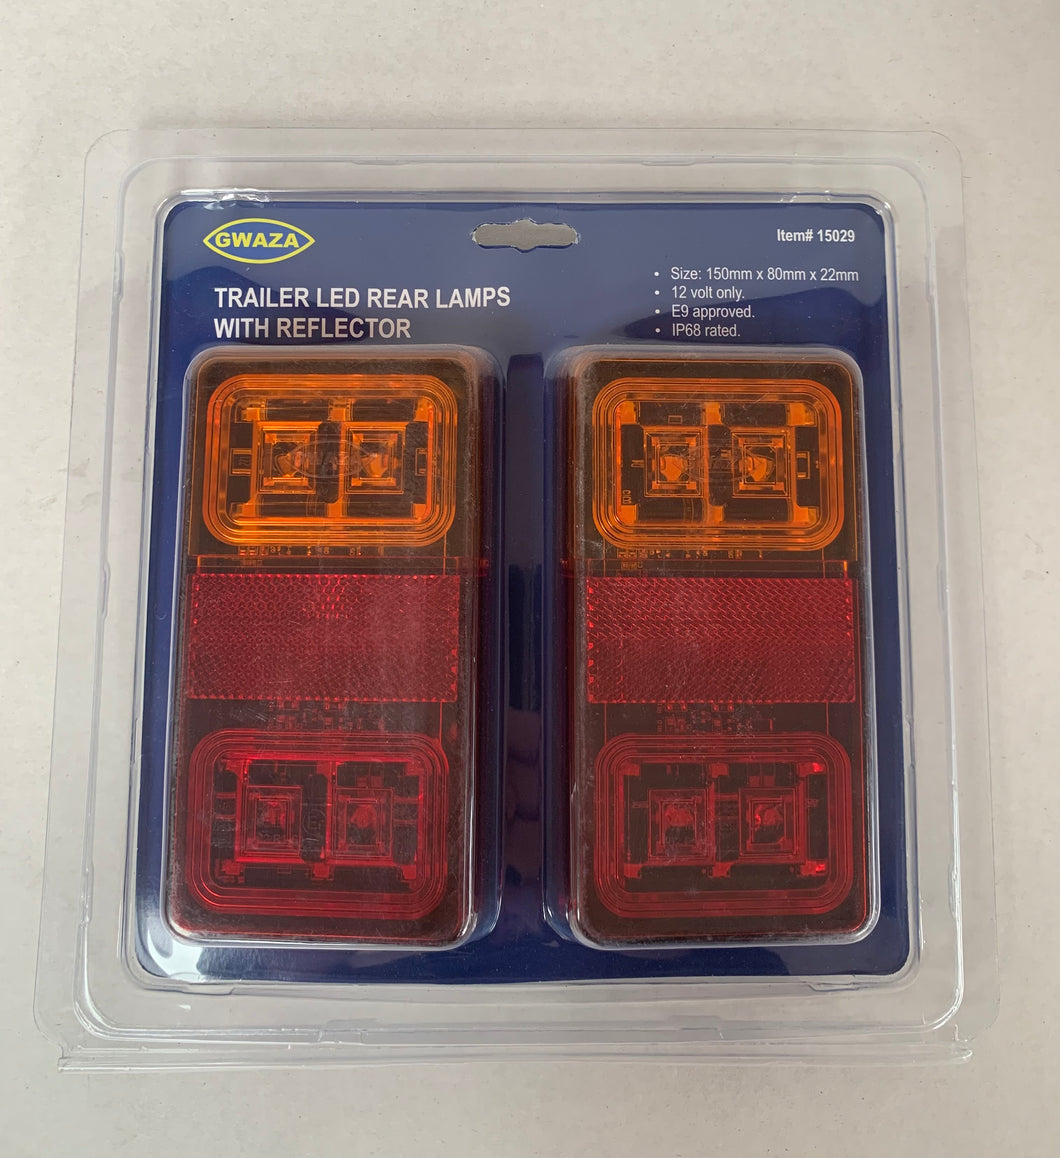 Trailer LED Rear Lamps with Reflector